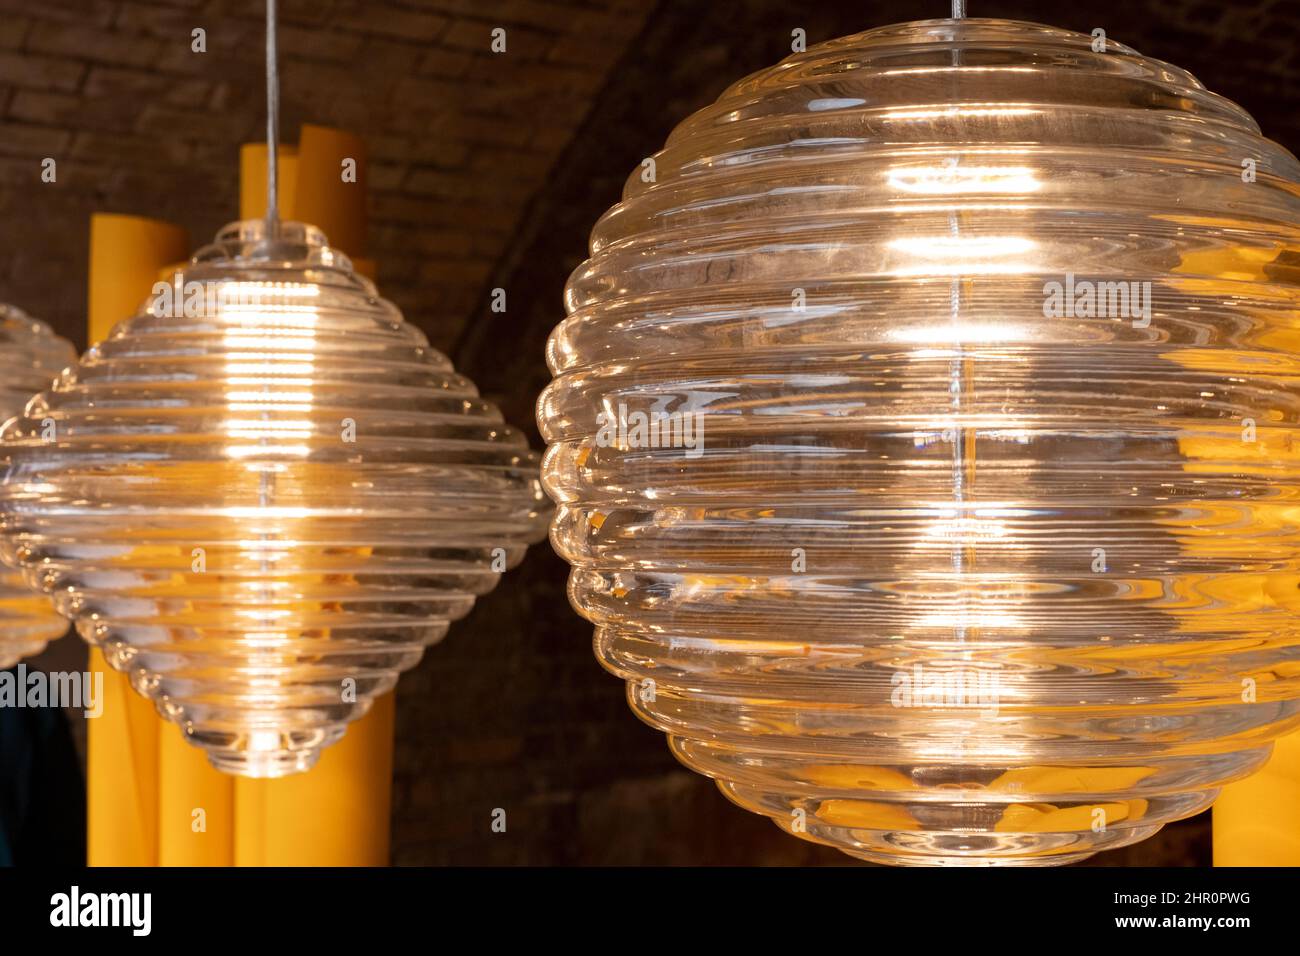 Glass pendant lights by the name Press, hanging in the Tom Dixon flagship store and showroom at Coal Drops Yard, Kings Cross, London UK. Stock Photo